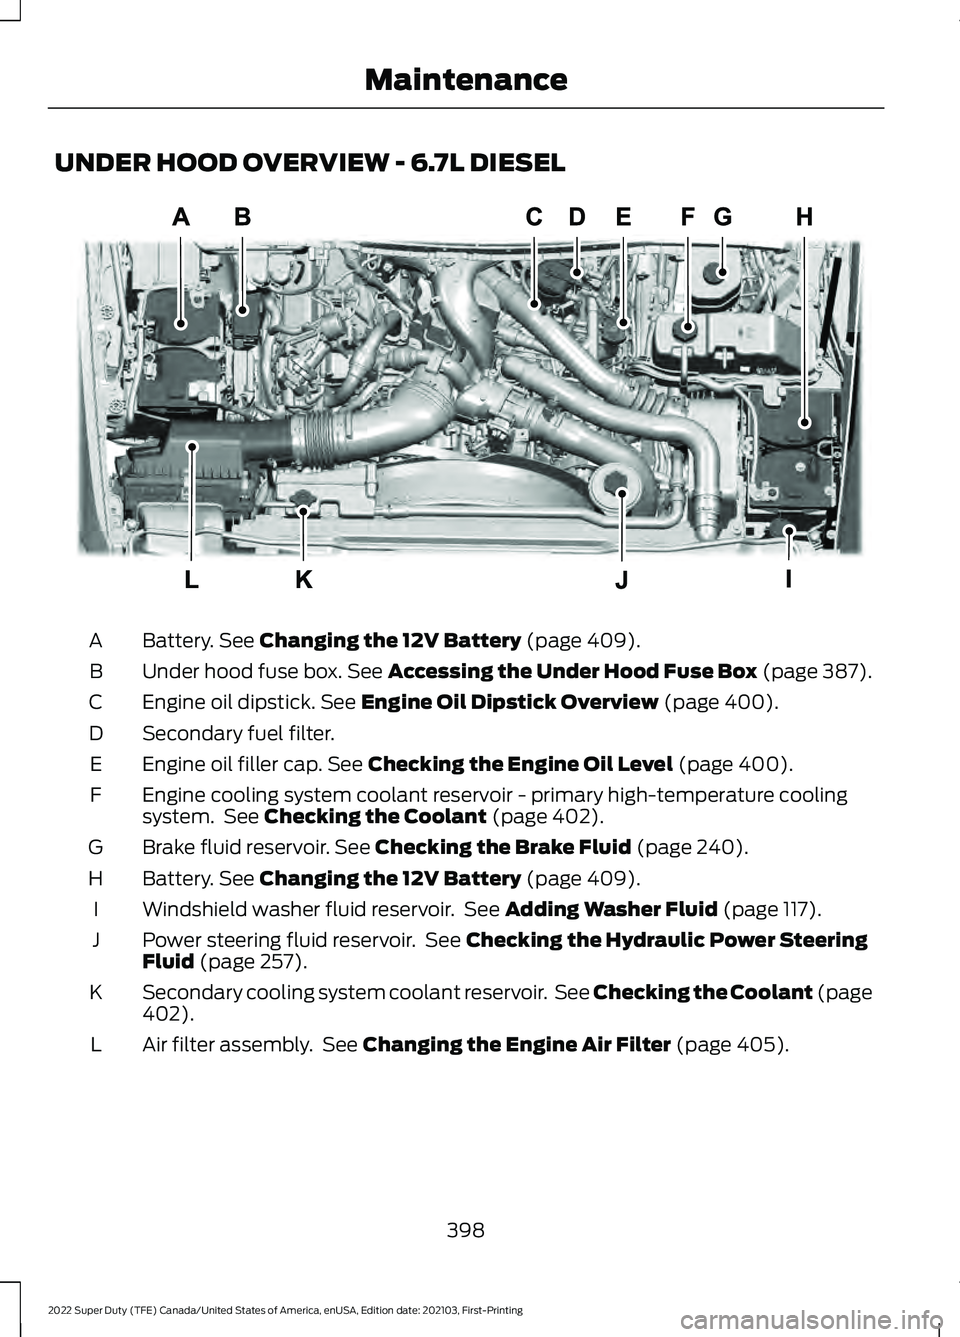 FORD F-600 2022  Owners Manual UNDER HOOD OVERVIEW - 6.7L DIESEL
Battery. See Changing the 12V Battery (page 409).
A
Under hood fuse box.
 See Accessing the Under Hood Fuse Box (page 387).
B
Engine oil dipstick.
 See Engine Oil Dip